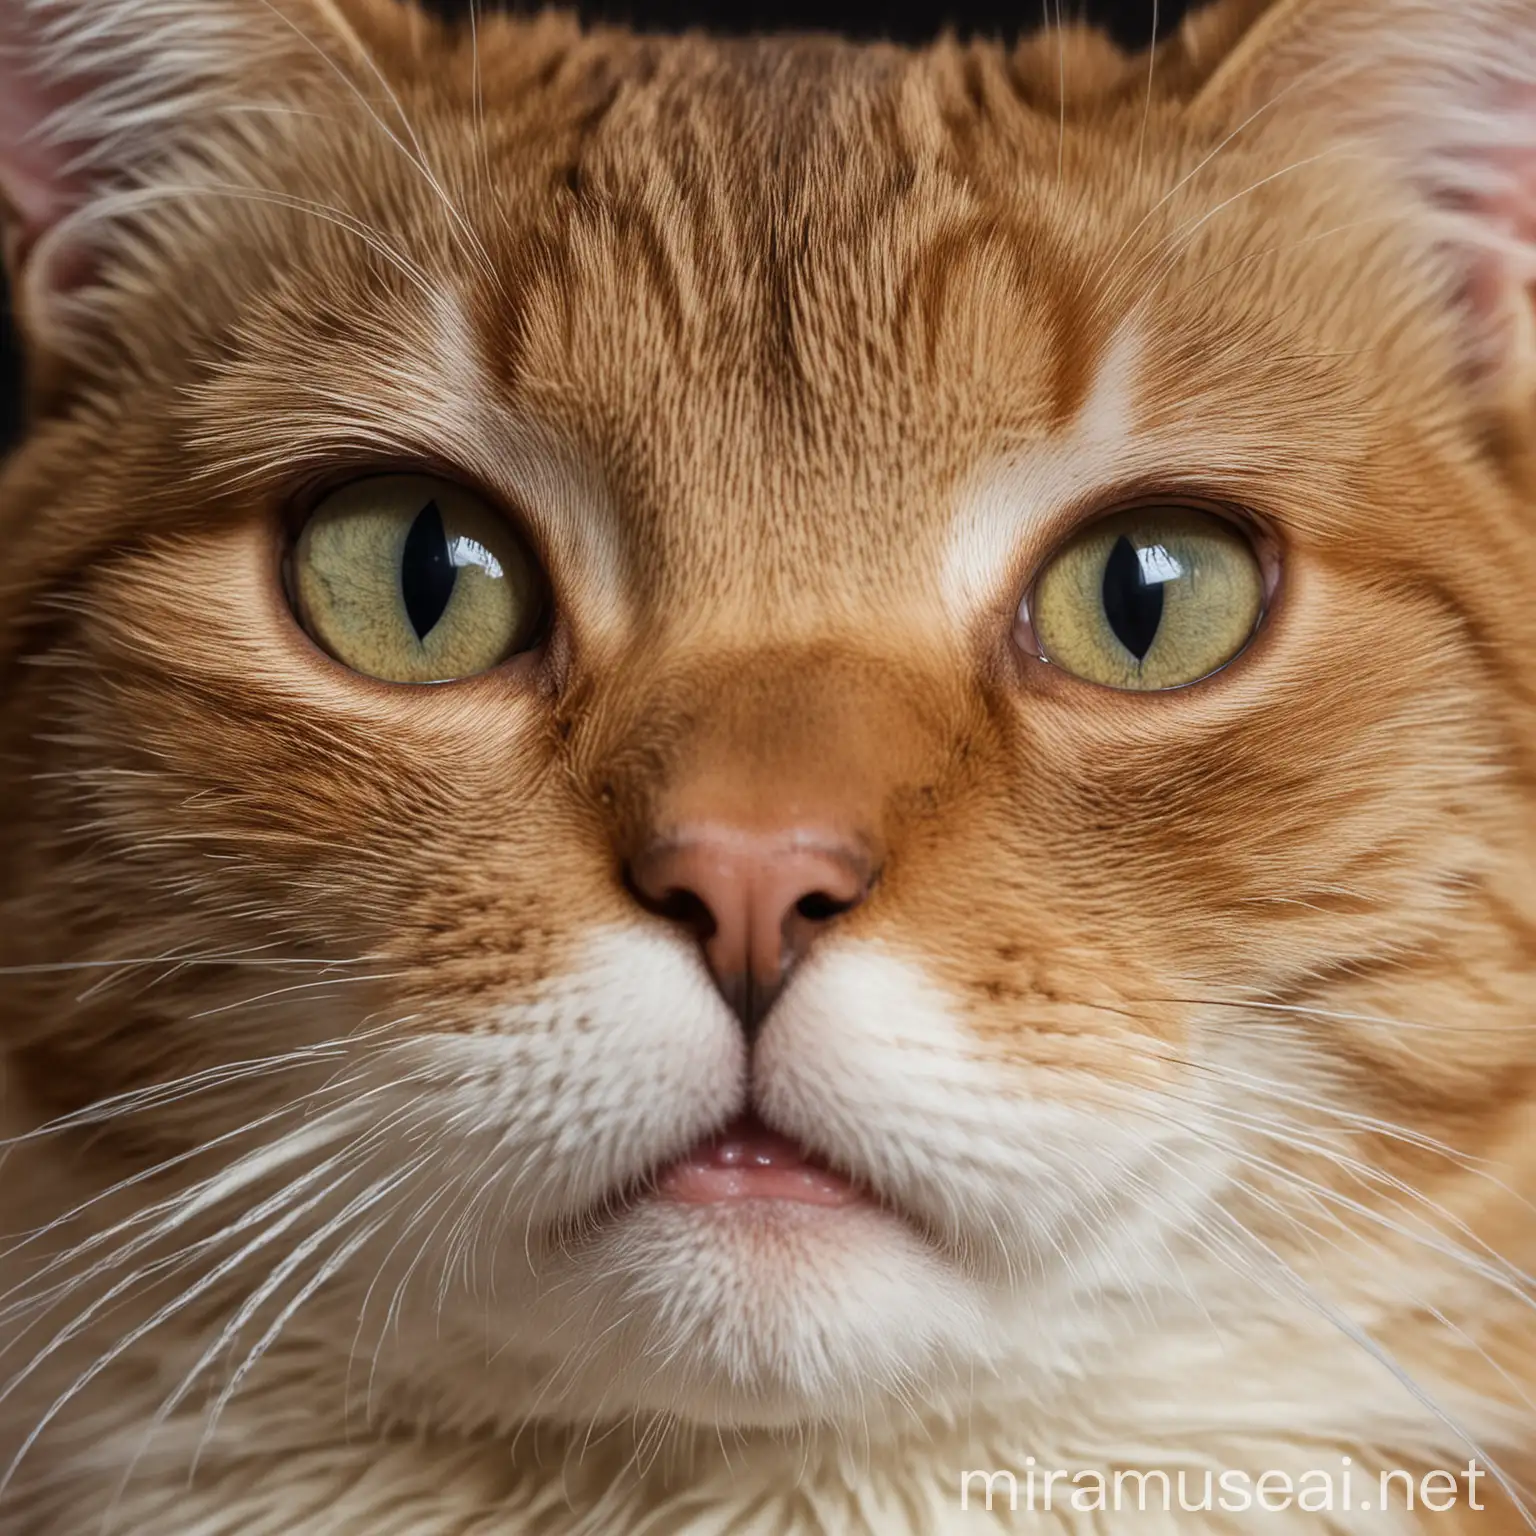 Film a close-up of your cat blinking slowly with a content expression, showcasing their trust and affection.